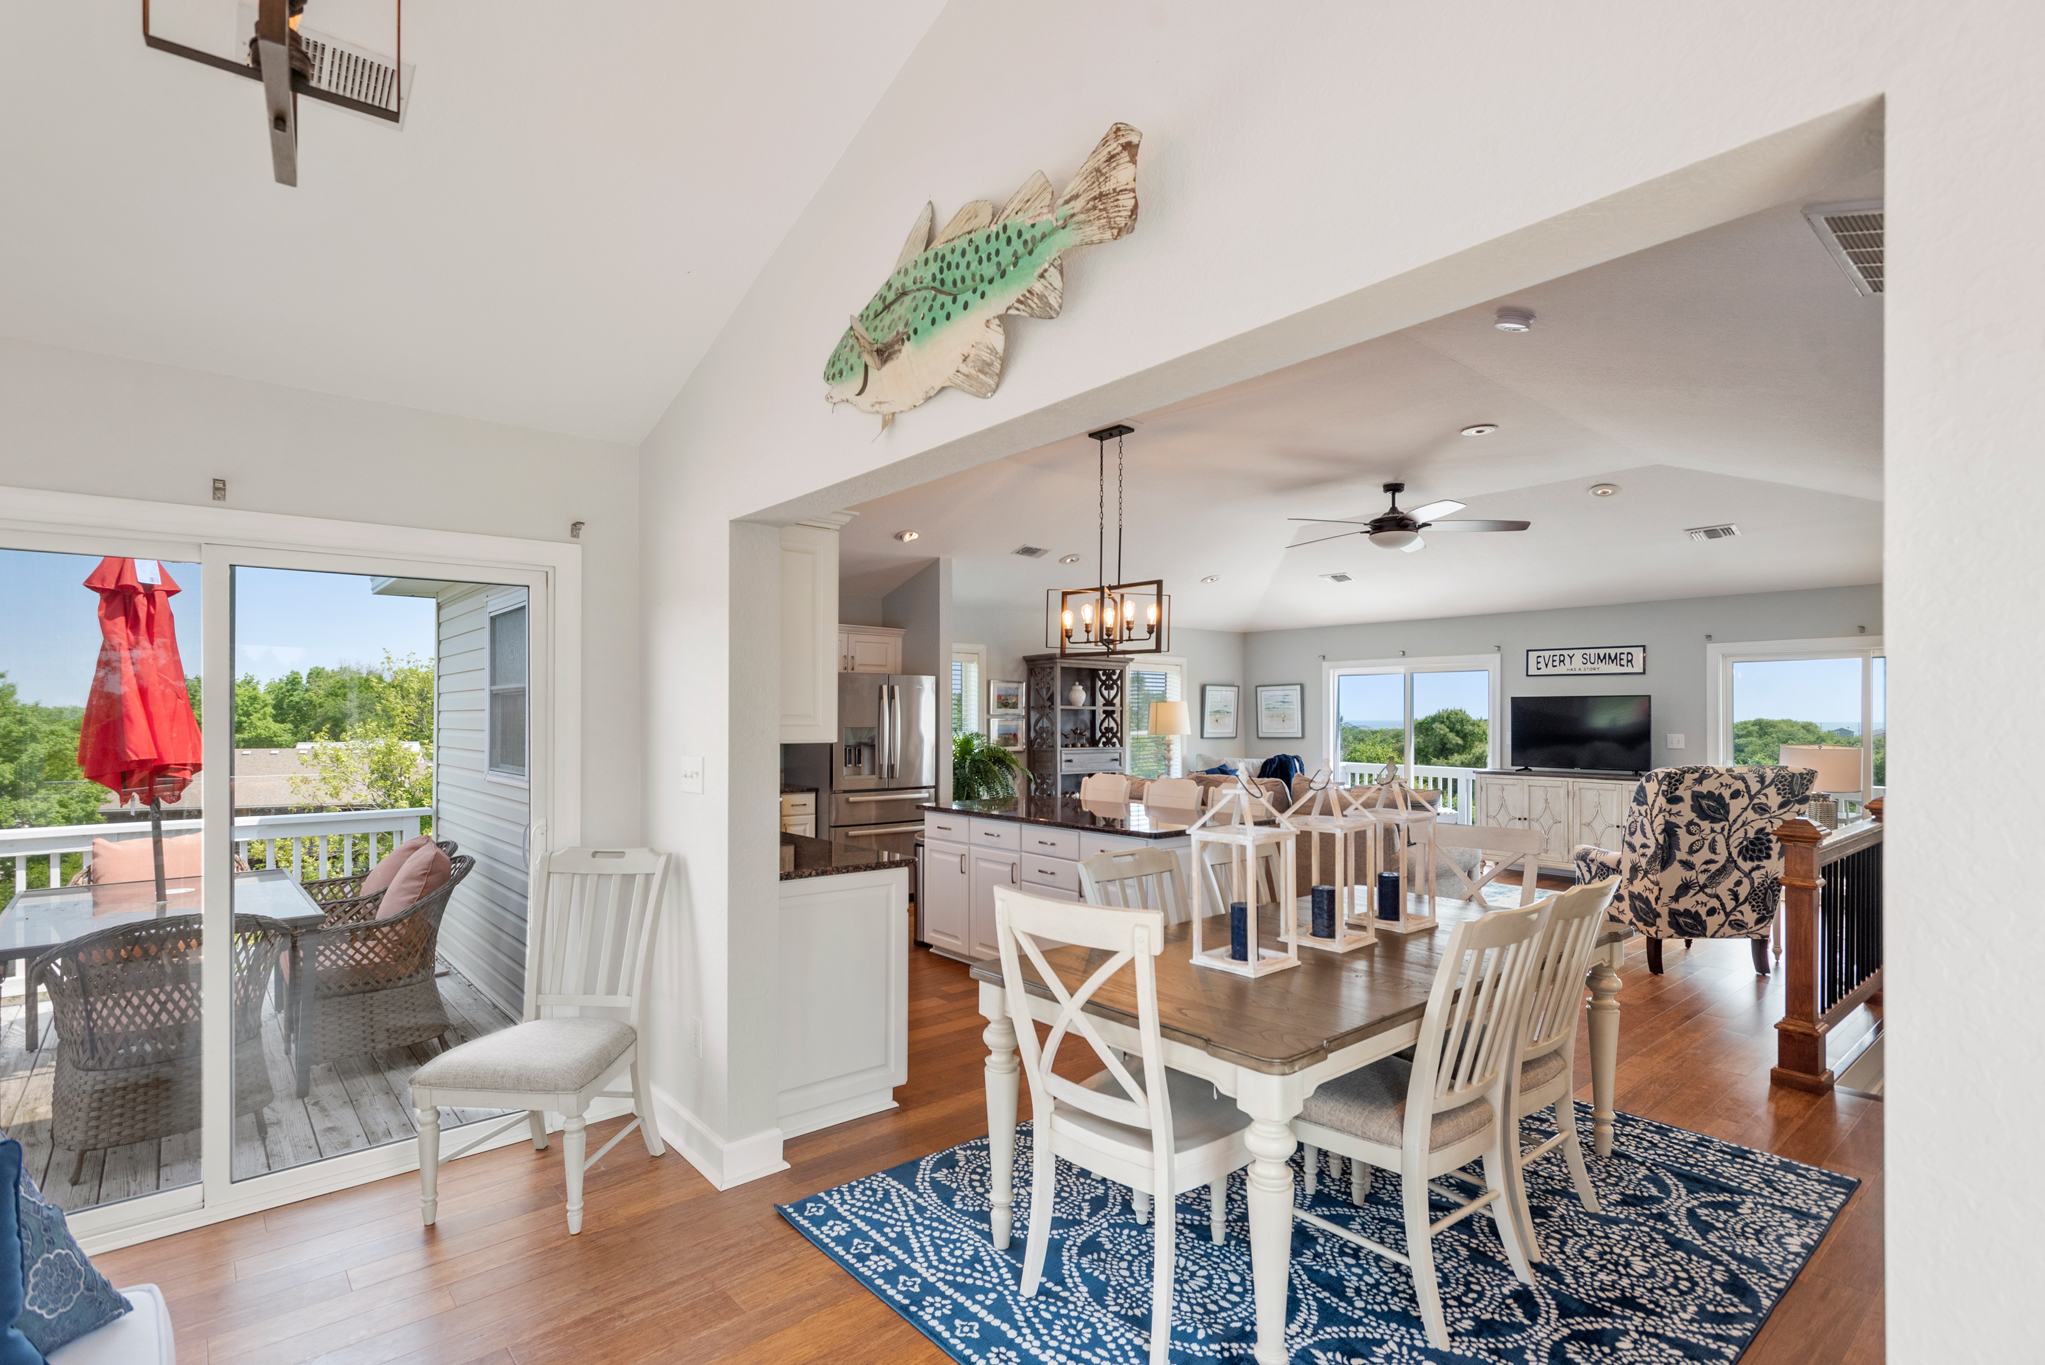 KH9527: Top Level Dining Area and Sunroom